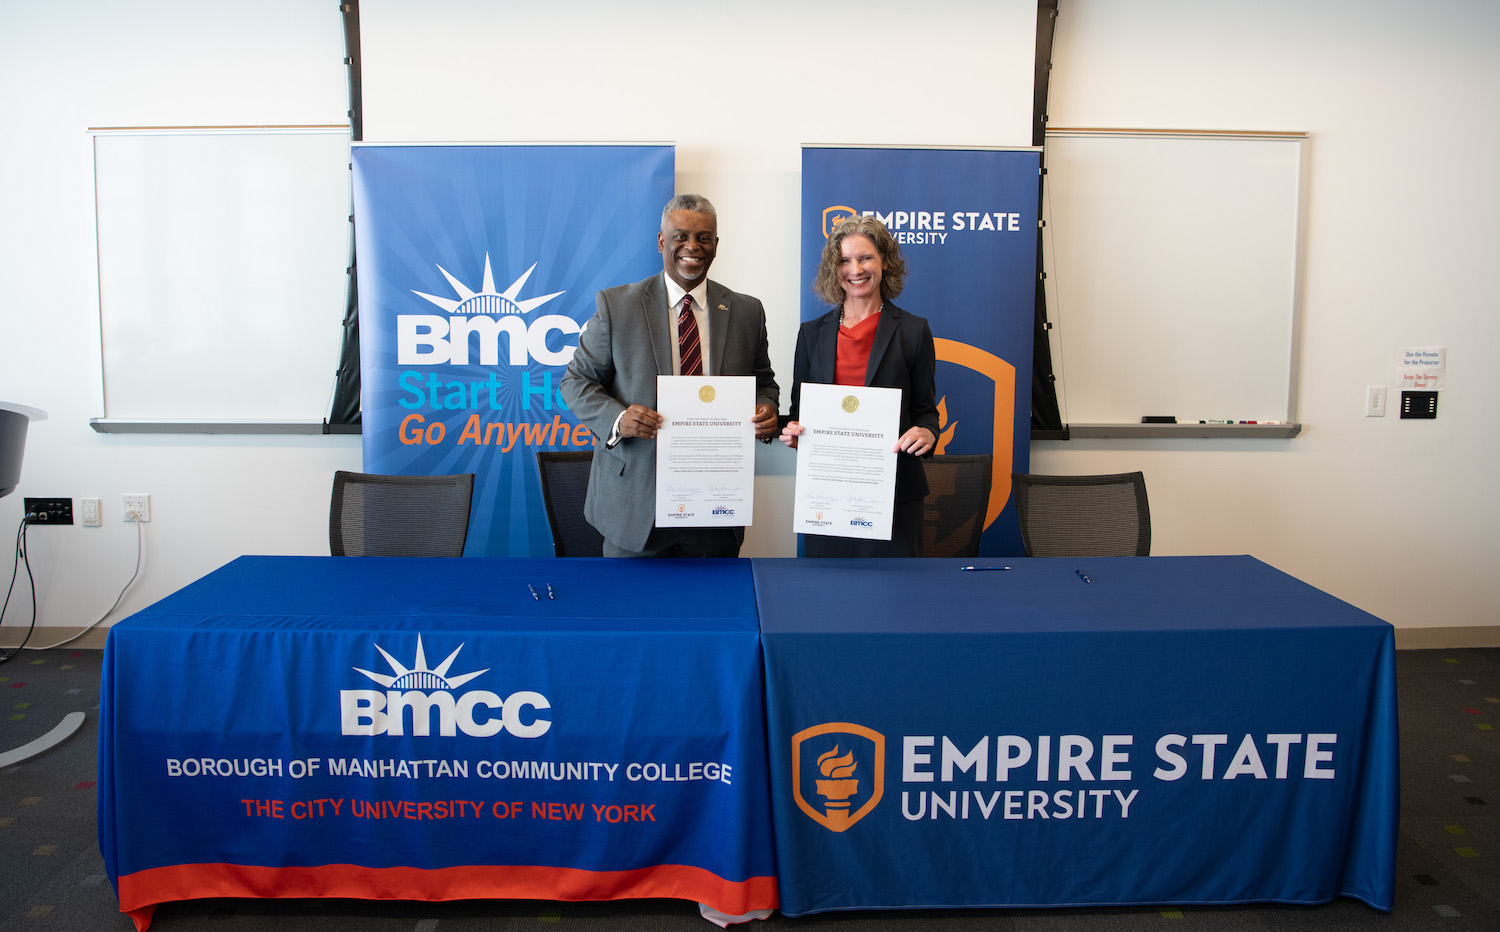 BMCC President Anthony E. Munroe and SUNY Empire State University President Lisa Vollendorf sign a memorandum of understanding and ceremonially acknowledged a transfer agreement between the two institutions.